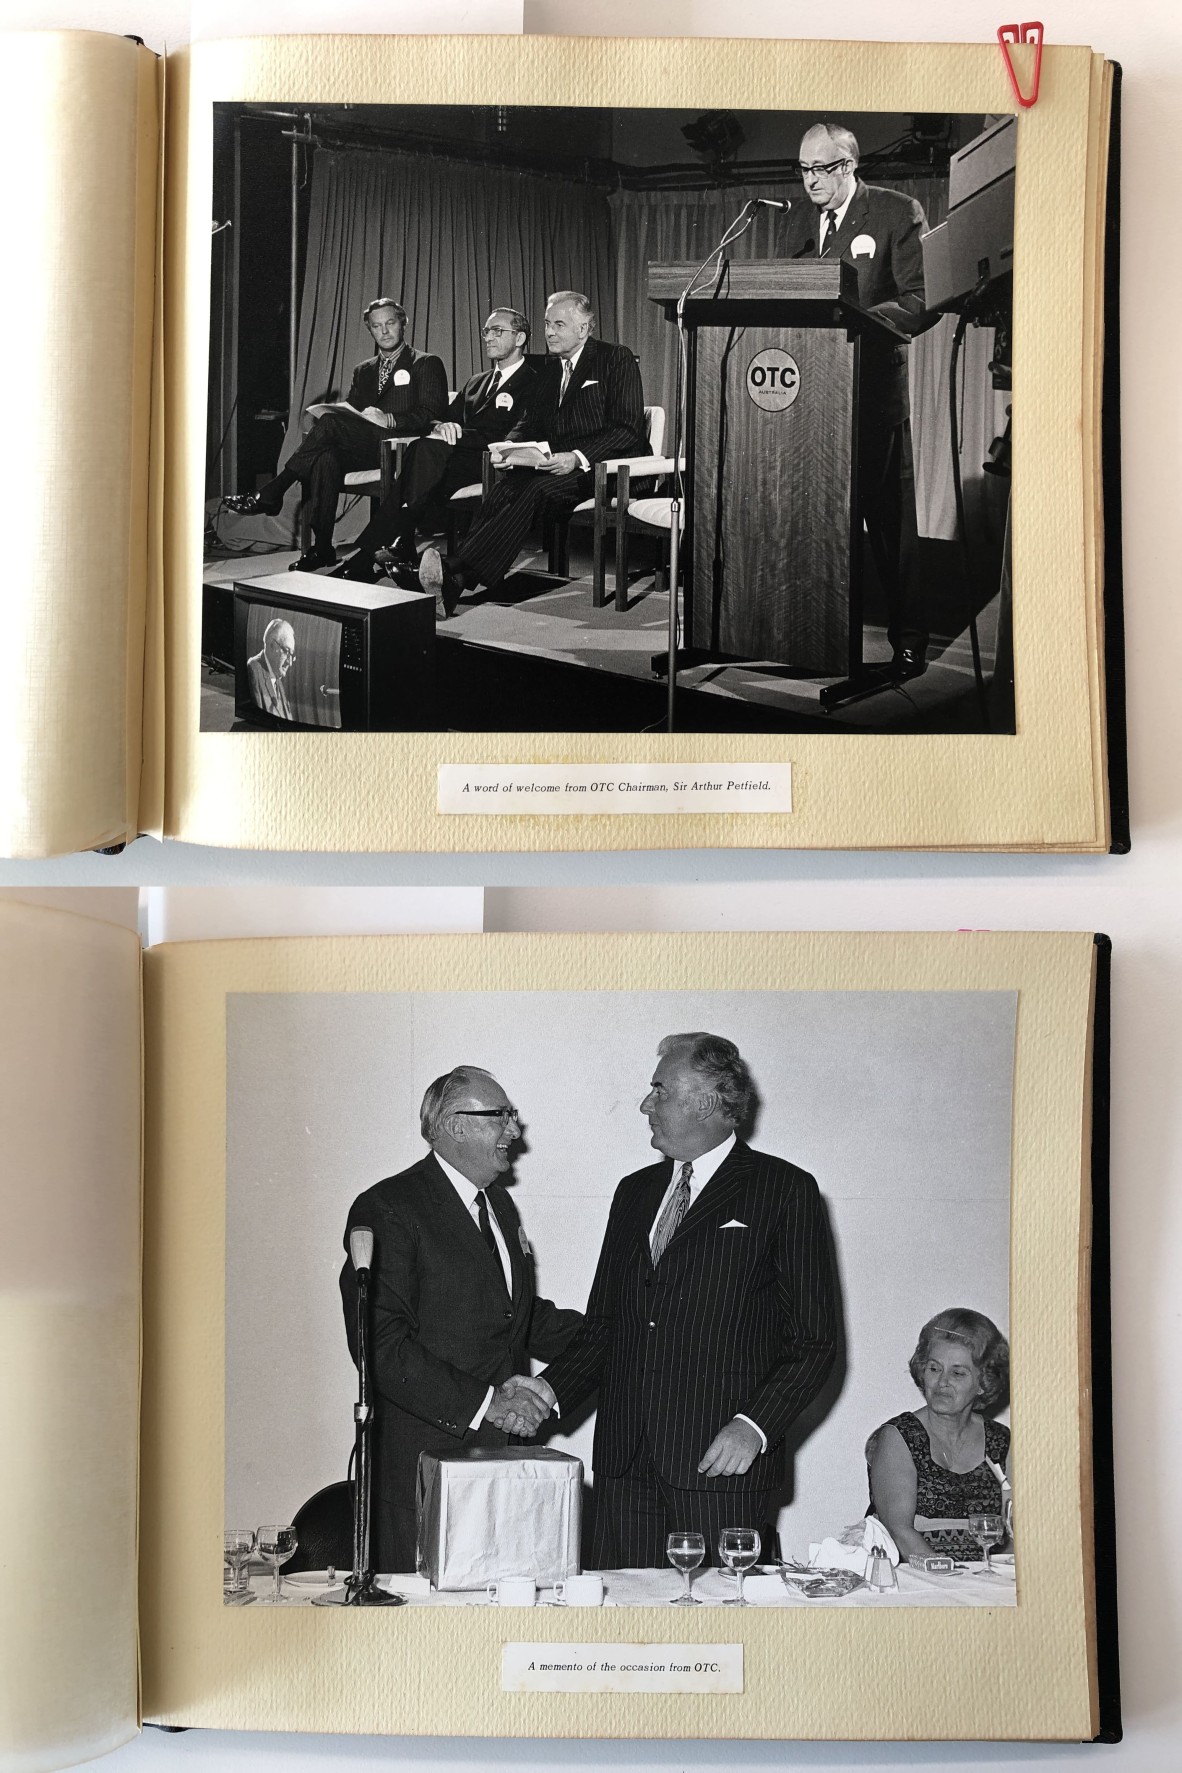 Album - Opening of the Broadway International Telecommunications Terminal 21 February 1974. Sir Arthur Petfield and the then Prime Minister, the Hon EG Whitlam, QC, MP